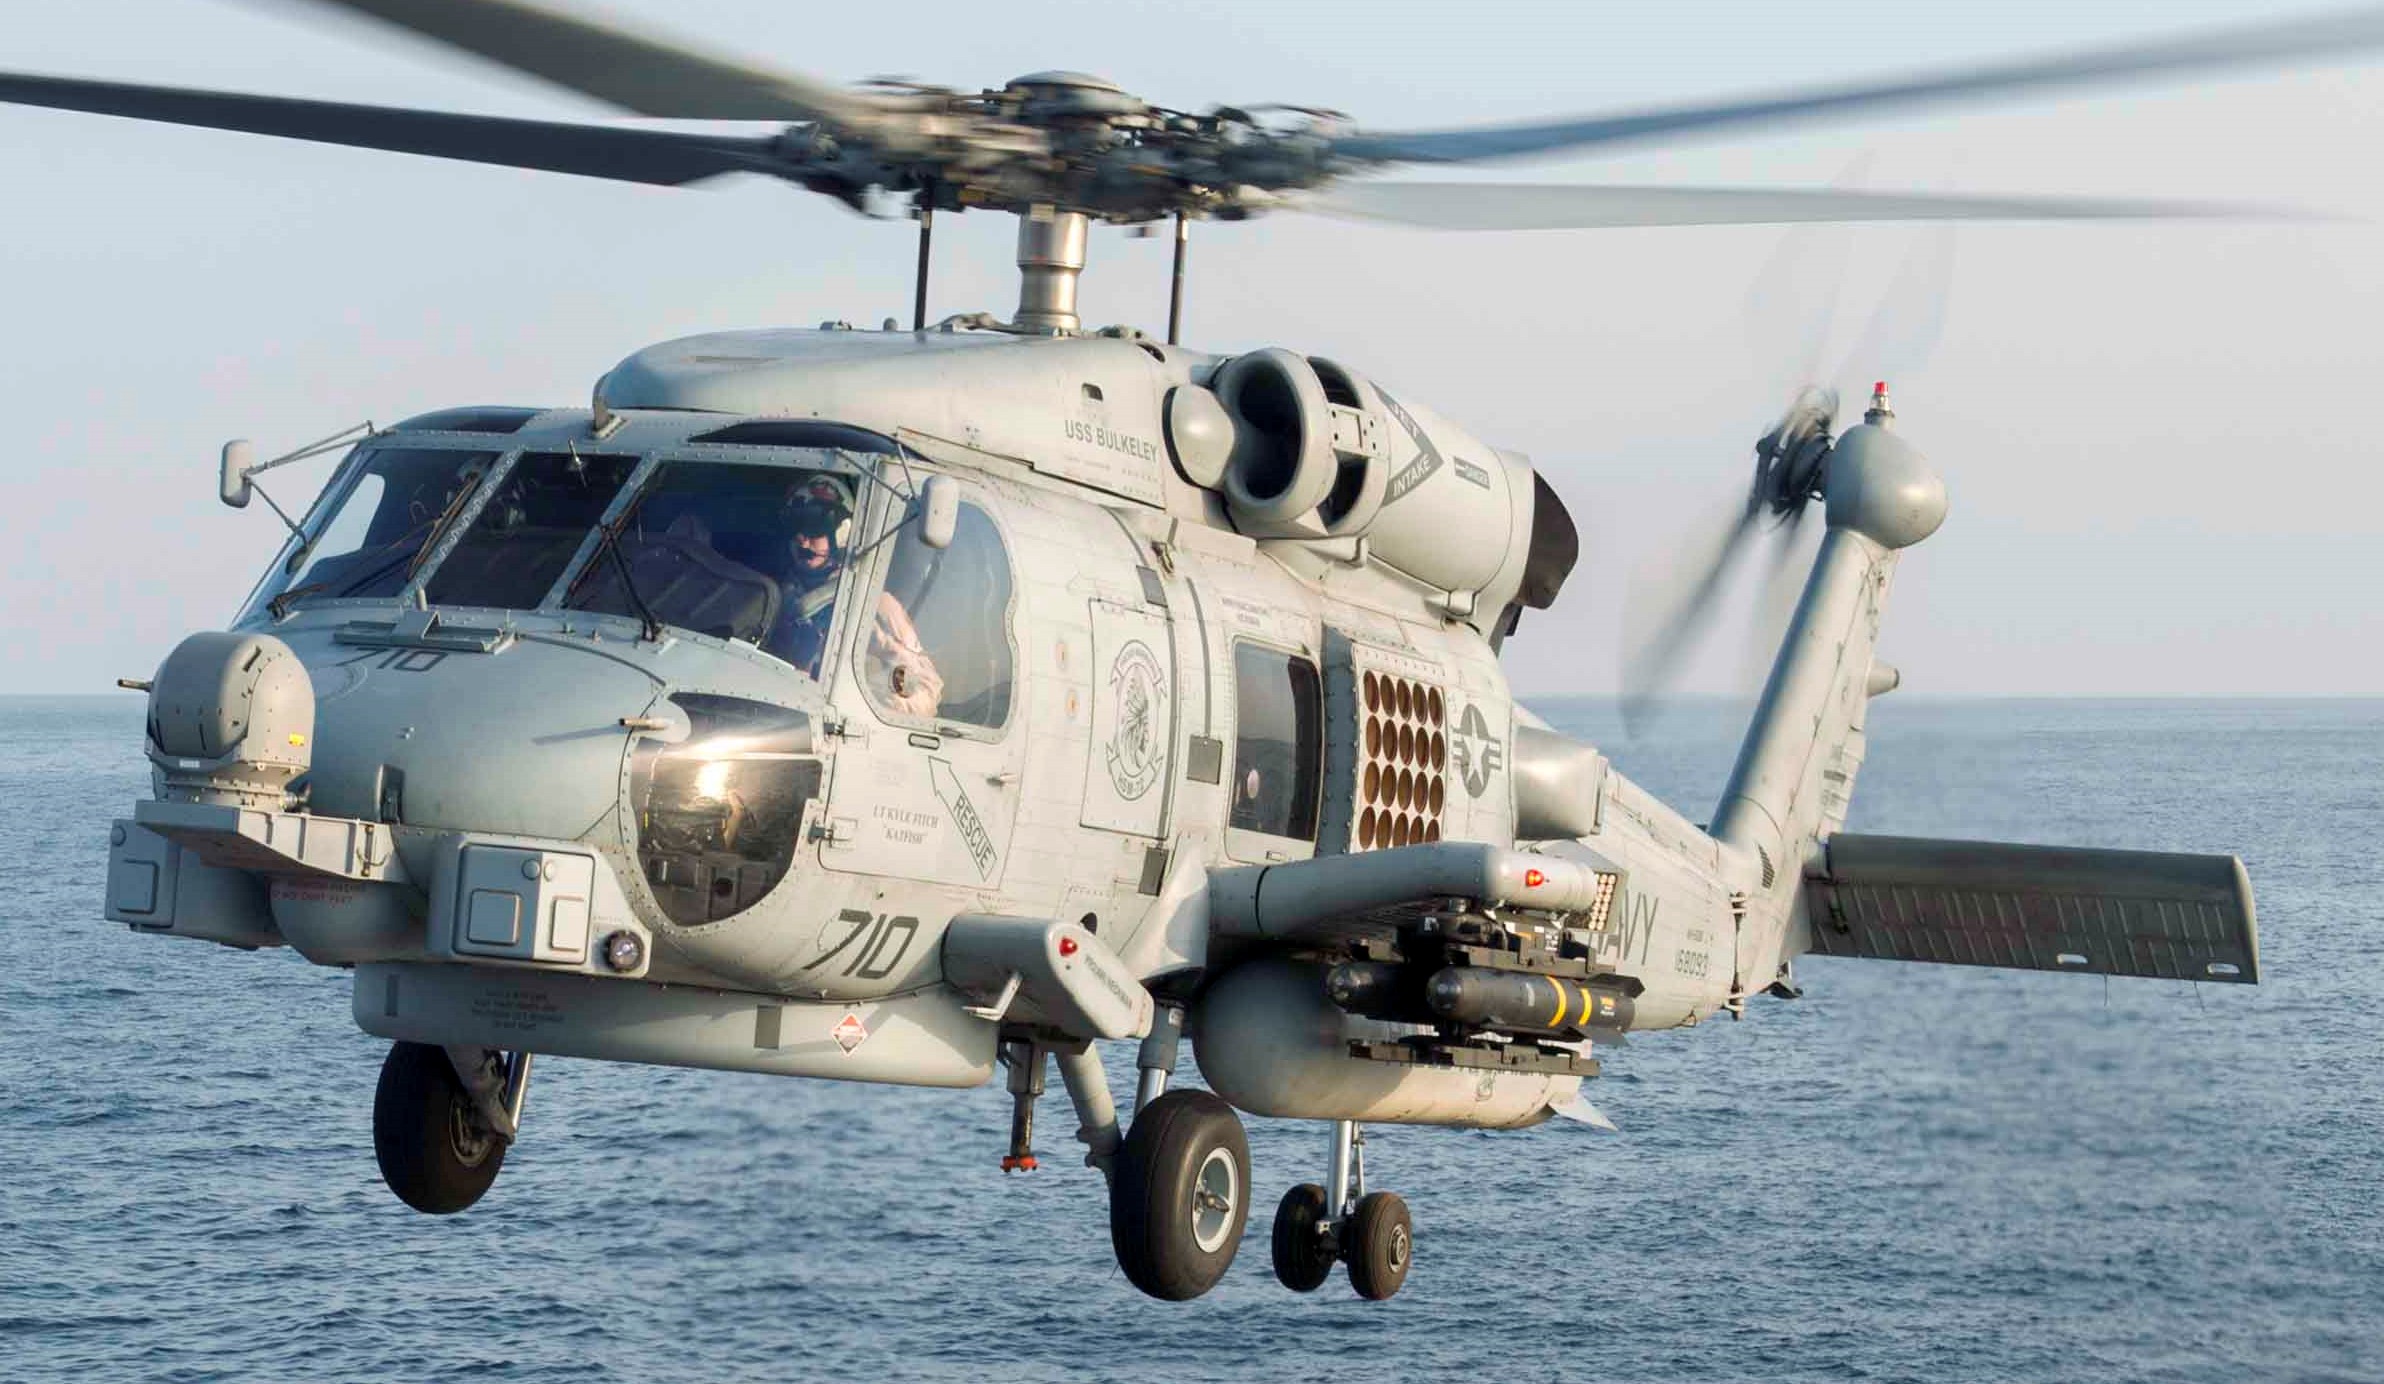 hsm-72 proud warriors helicopter maritime strike squadron us navy mh-60r seahawk 2016 08